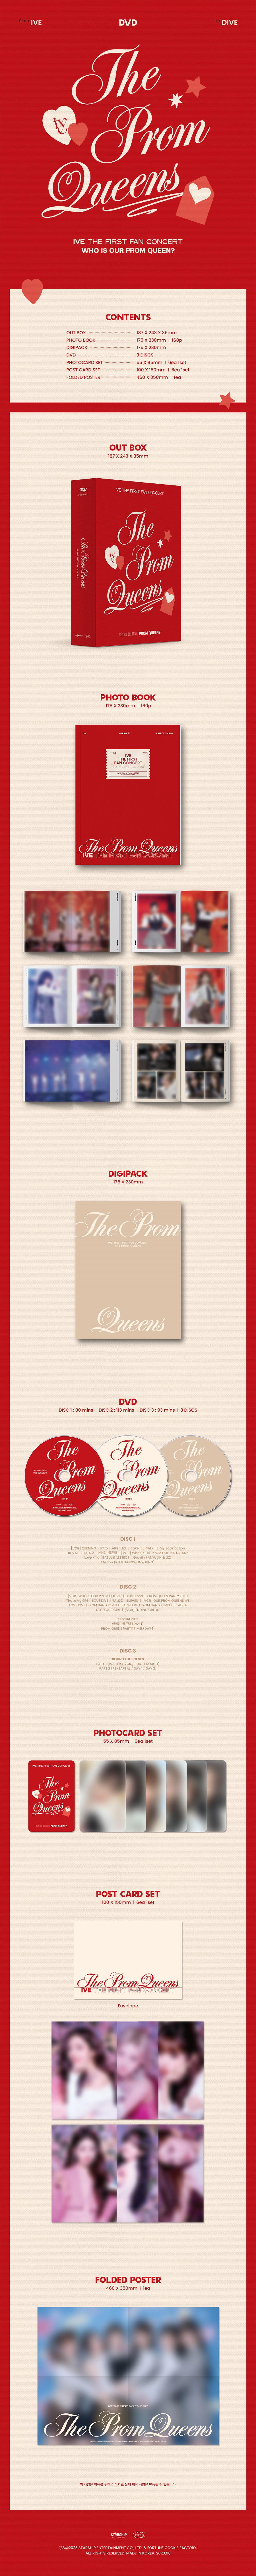 IVE(아이브) - IVE THE FIRST FAN CONCERT <The Prom Queens> DVD